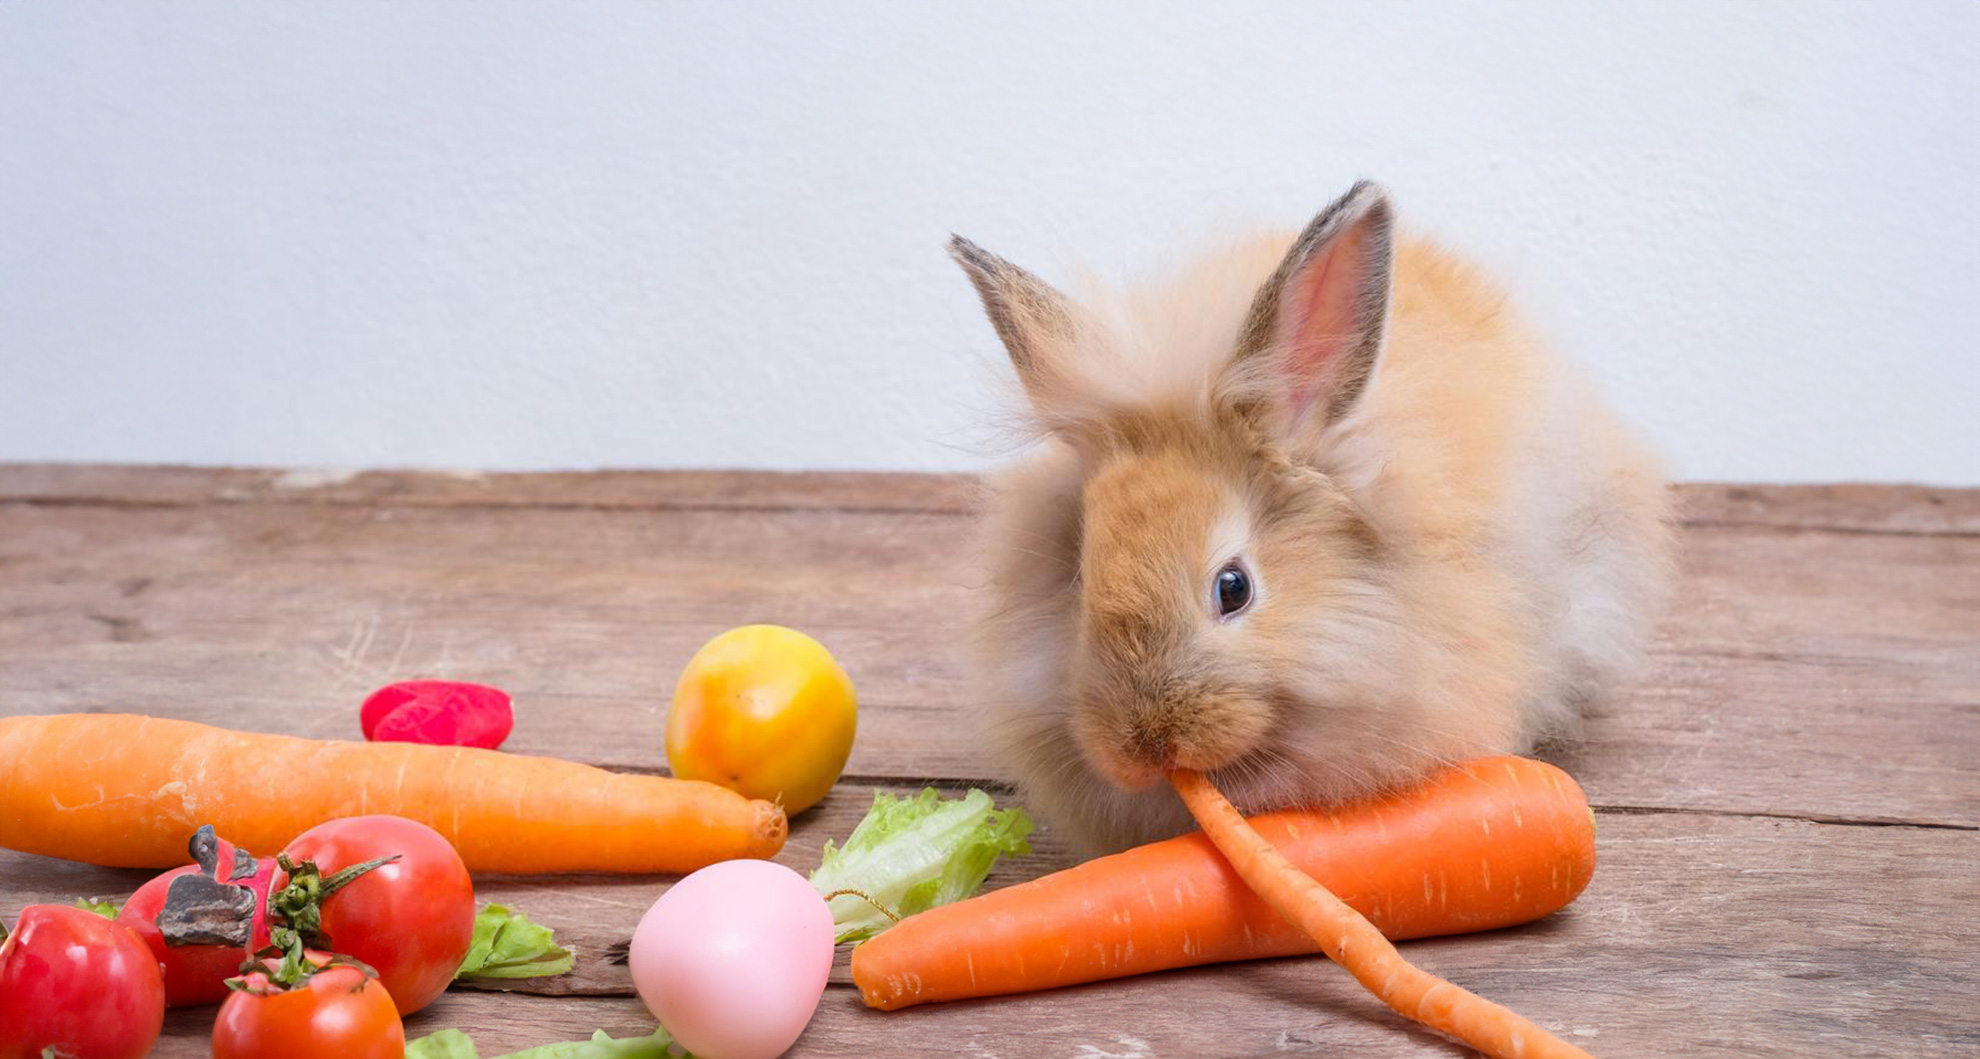 Rabbit Diet and Nutrition 101